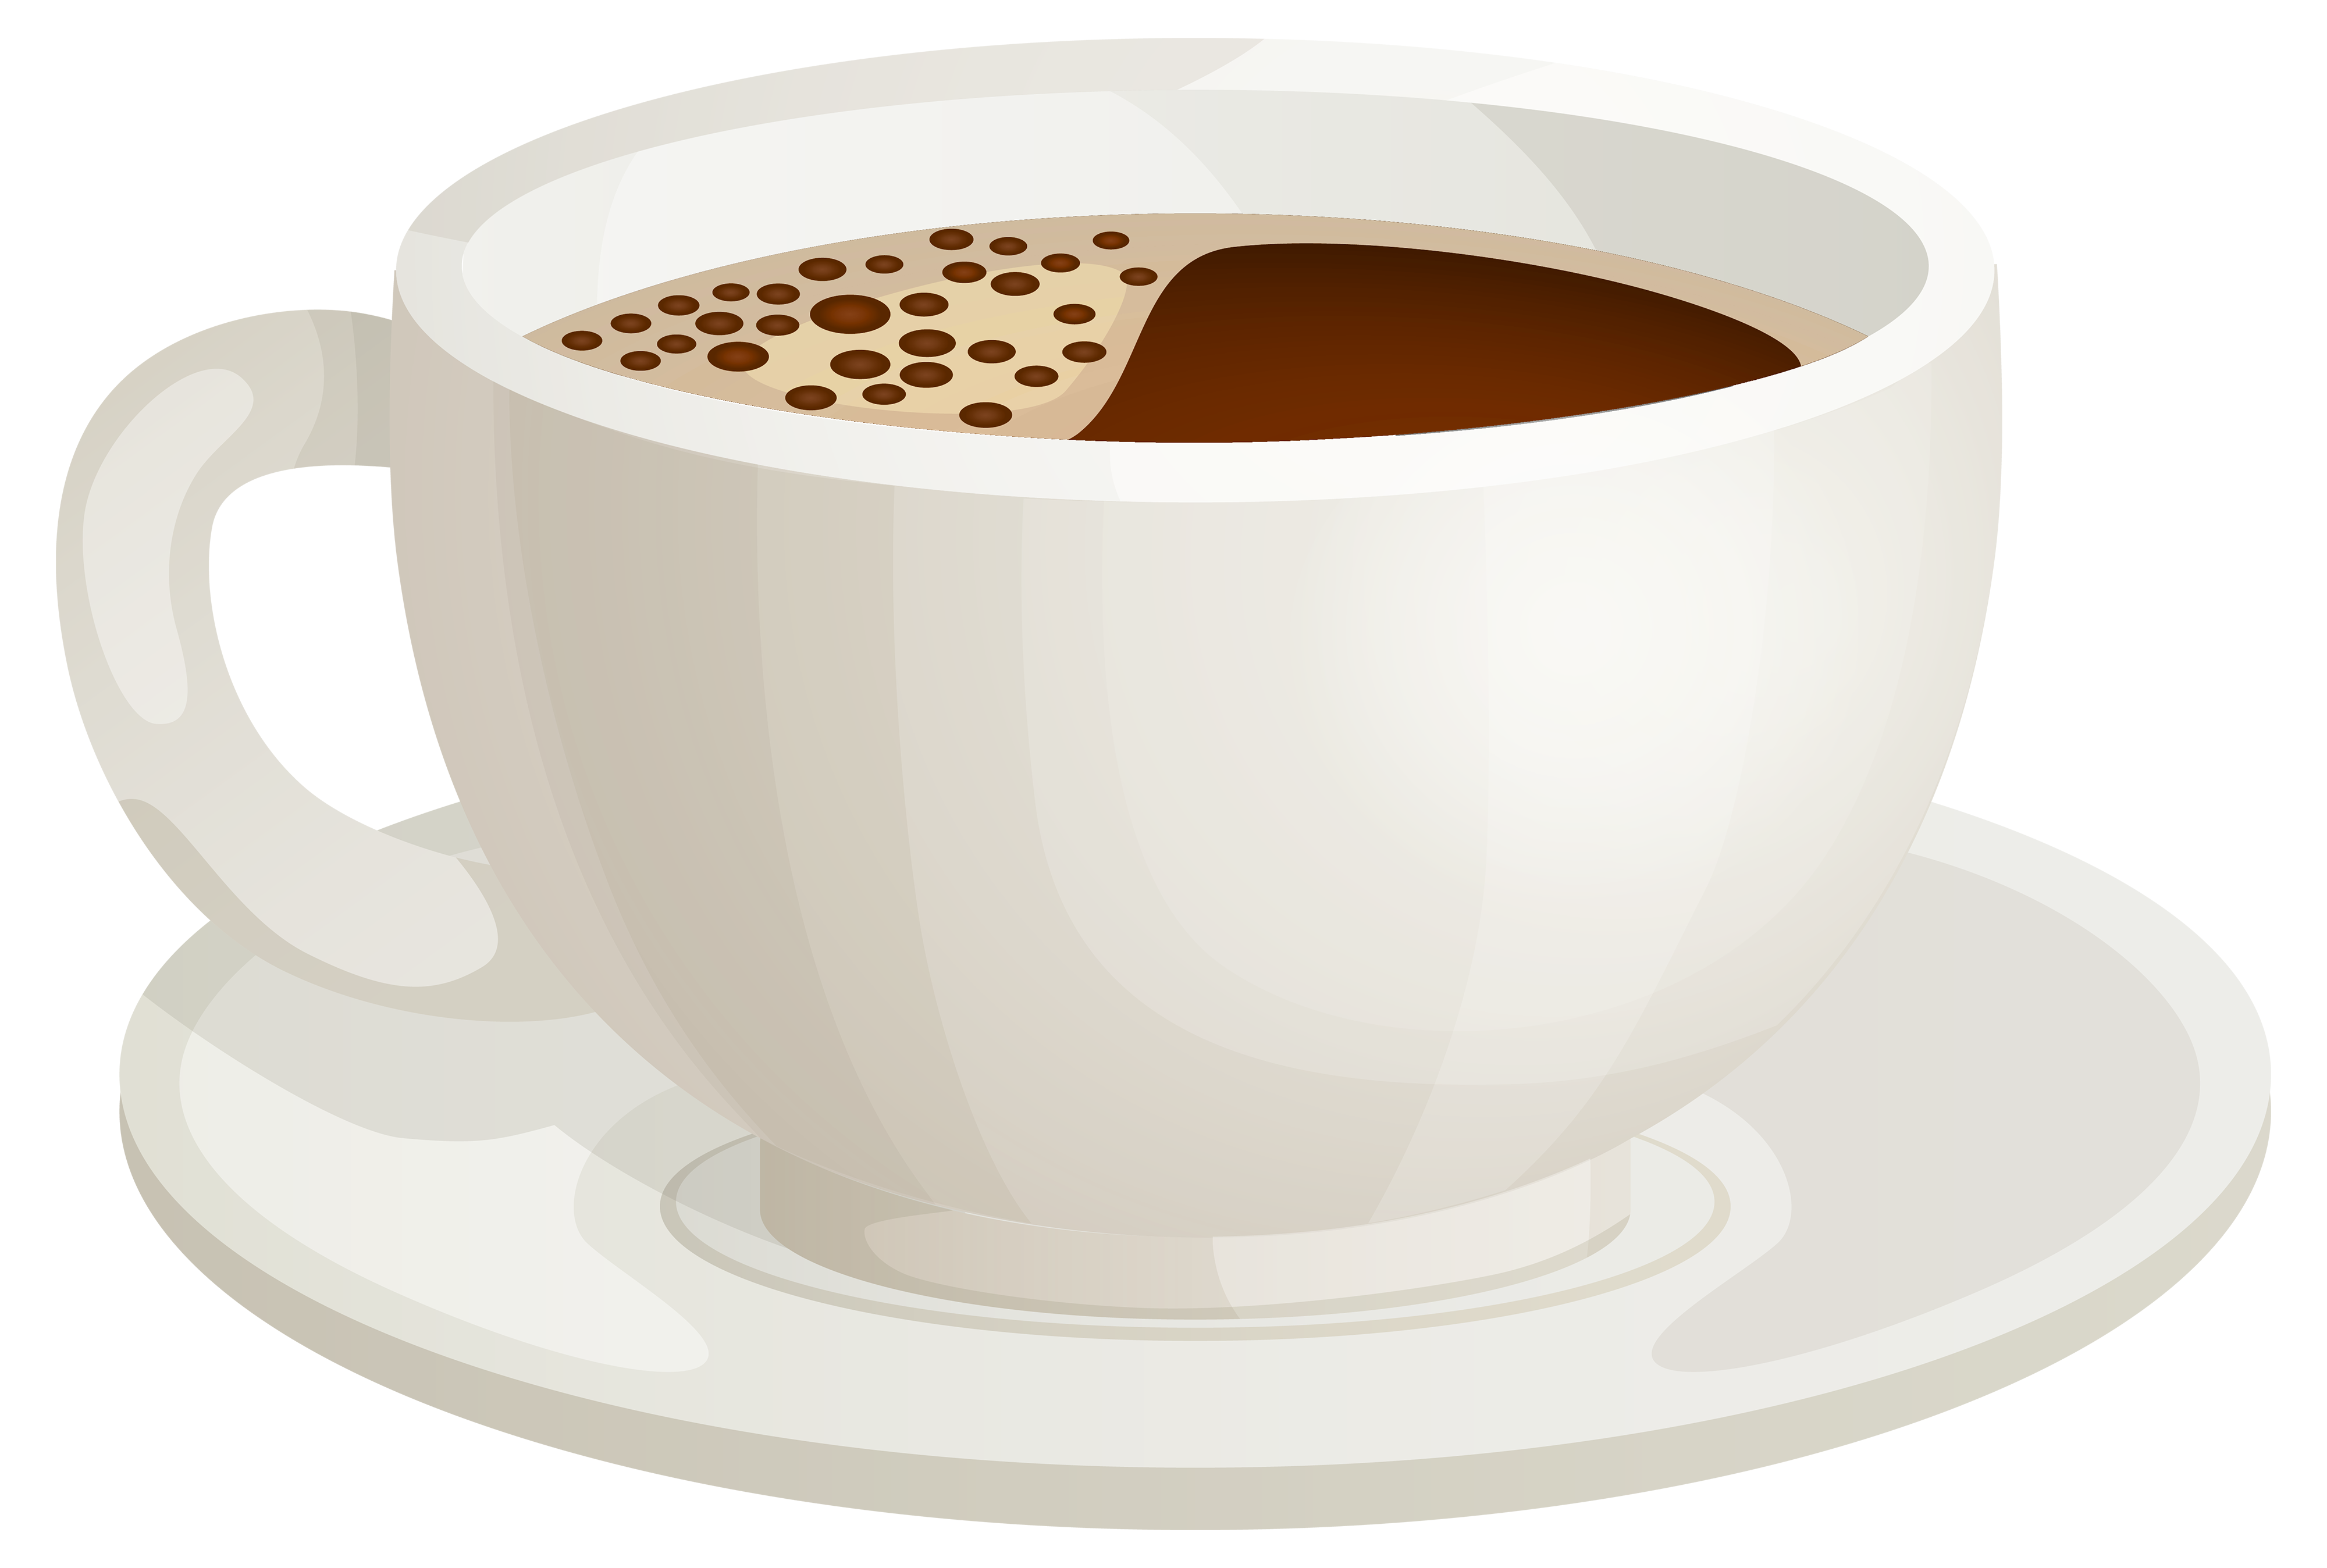 coffee cup clip art png - photo #48